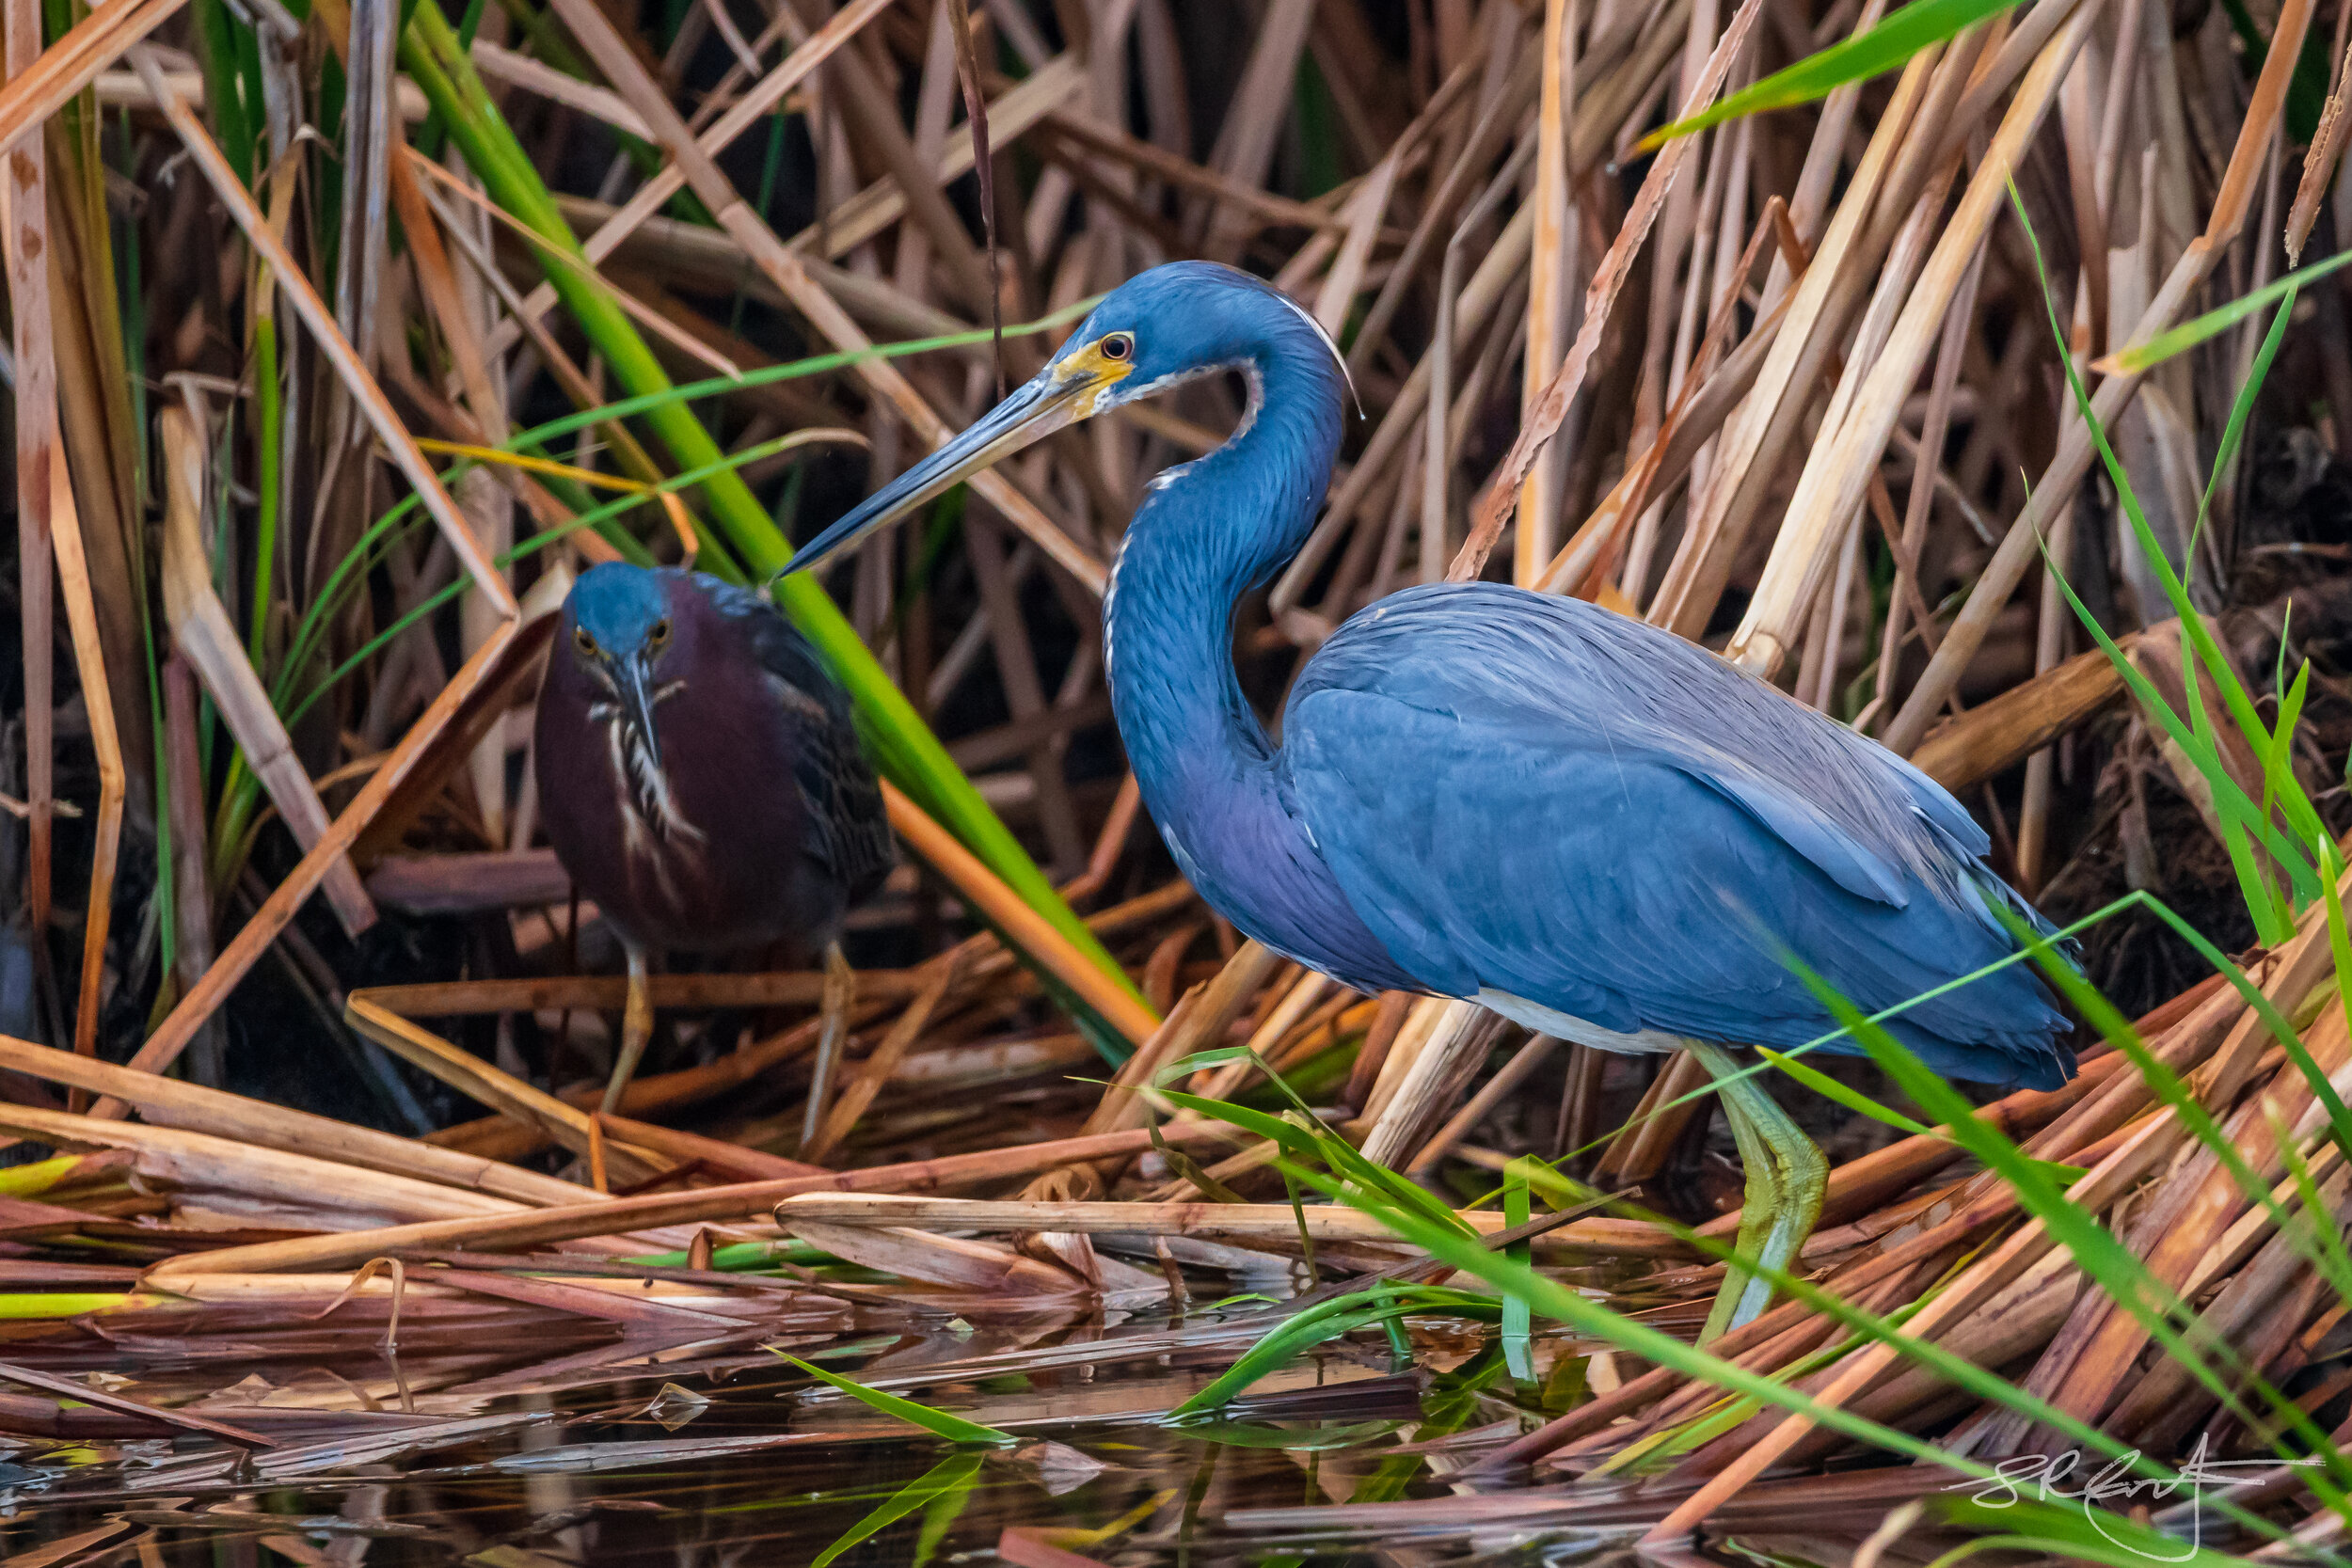 Green Heron and Tri-Color Heron in a small dispute